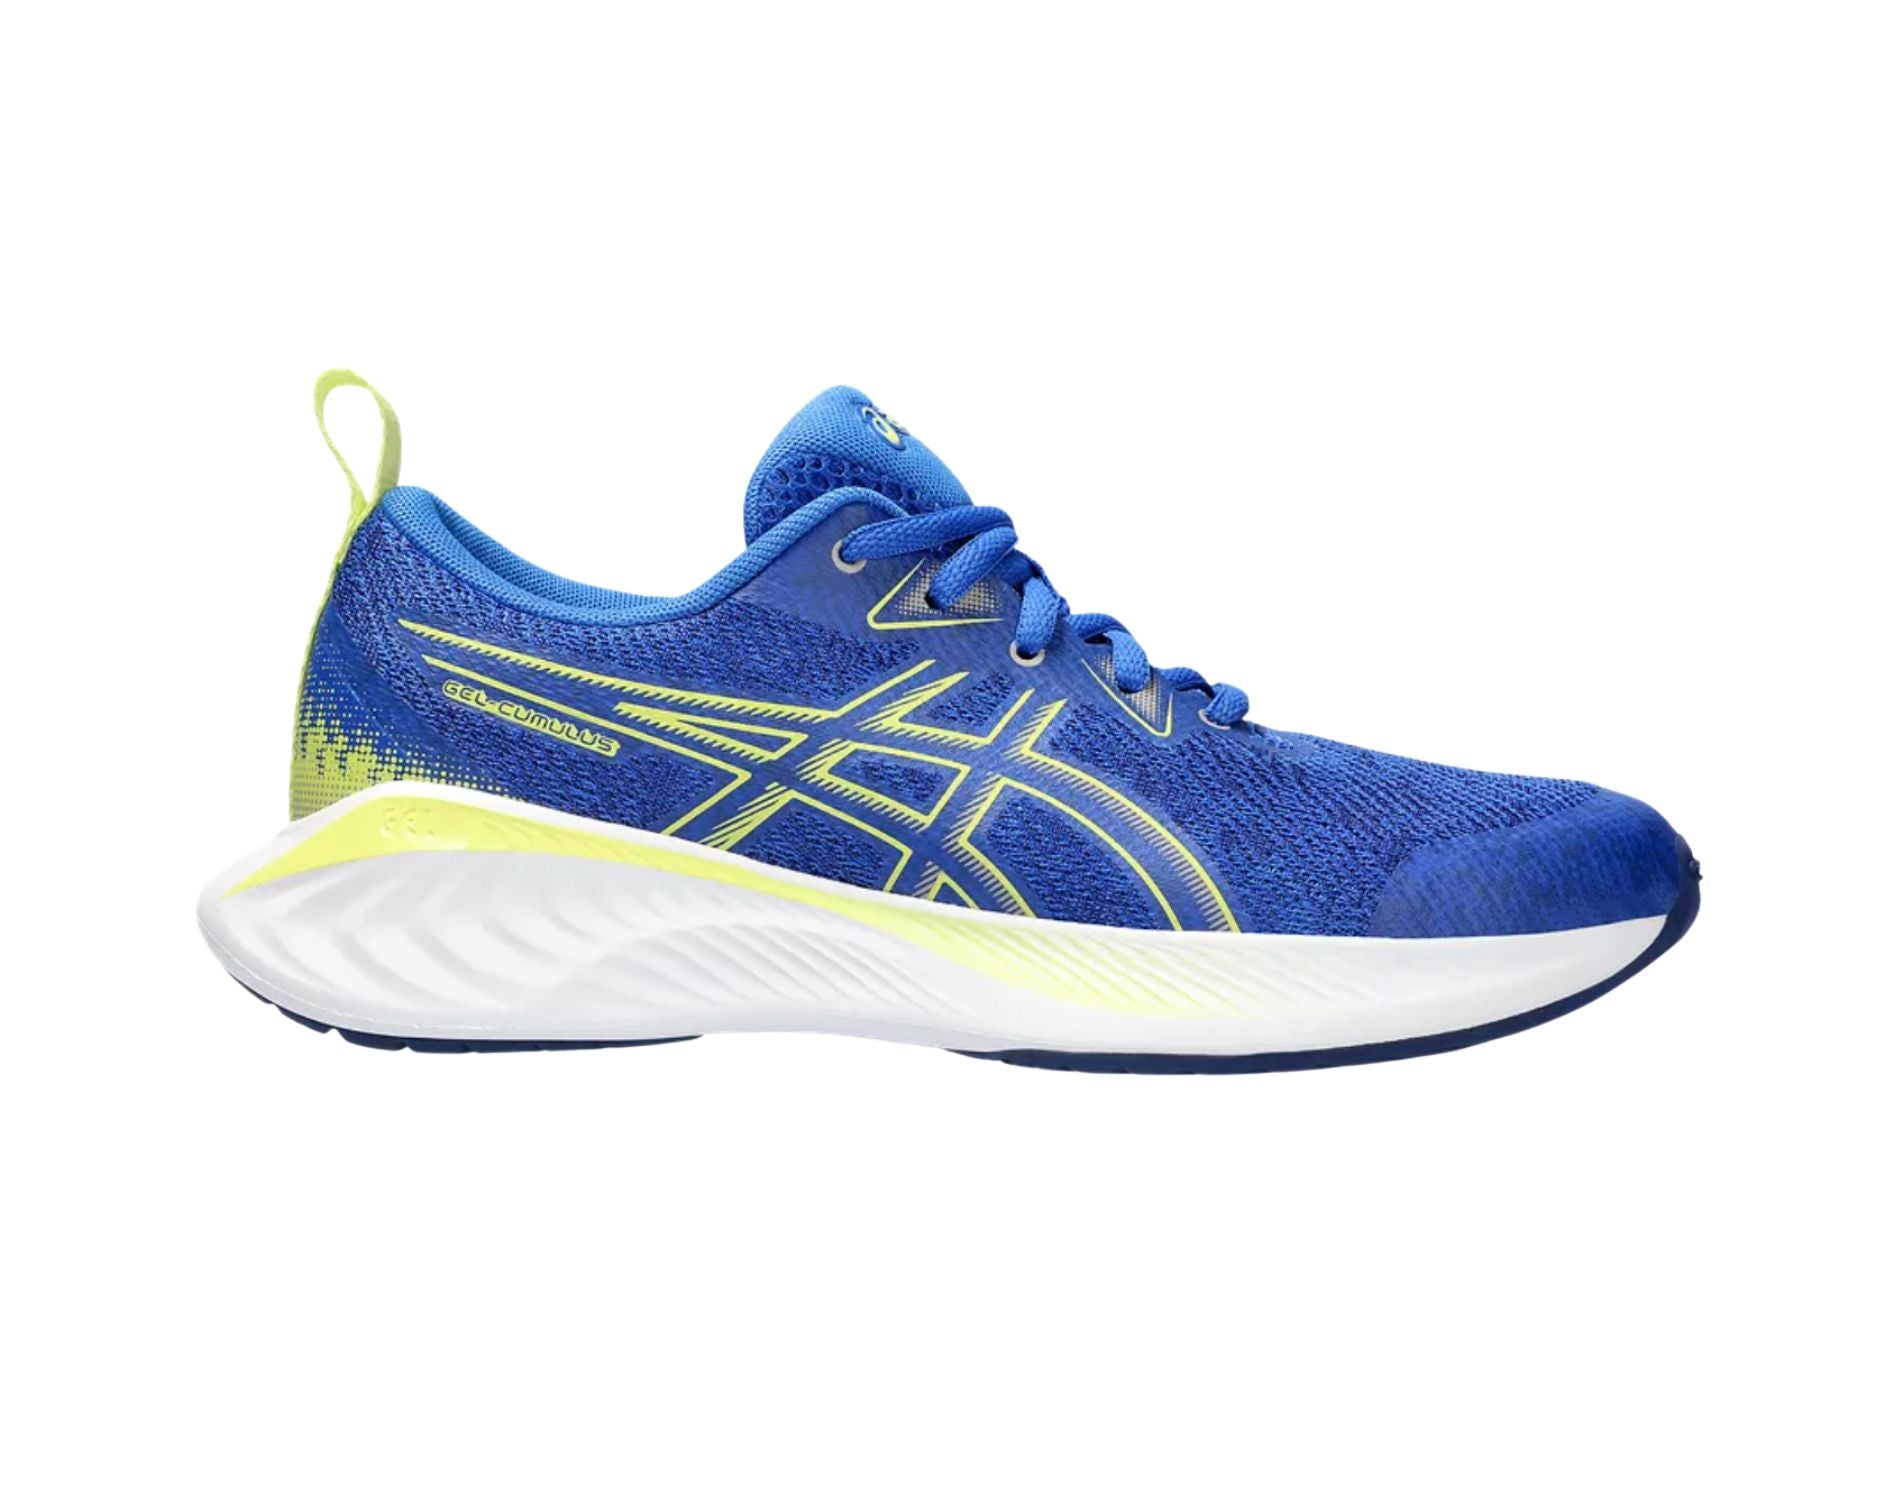 Asics Cumulus 25 GS boys sports shoes in illusion blue glow yellow colour